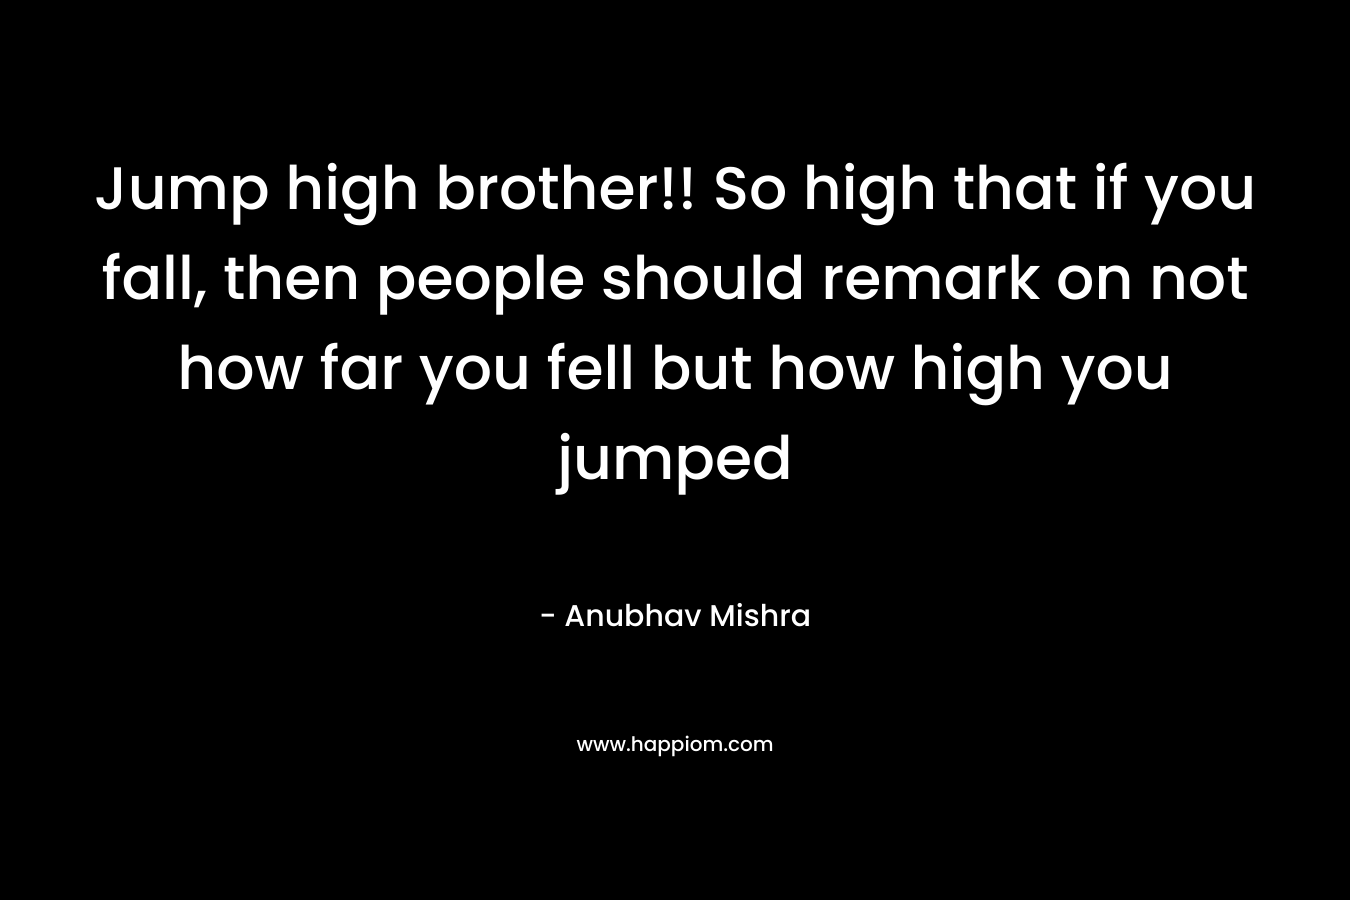 Jump high brother!! So high that if you fall, then people should remark on not how far you fell but how high you jumped